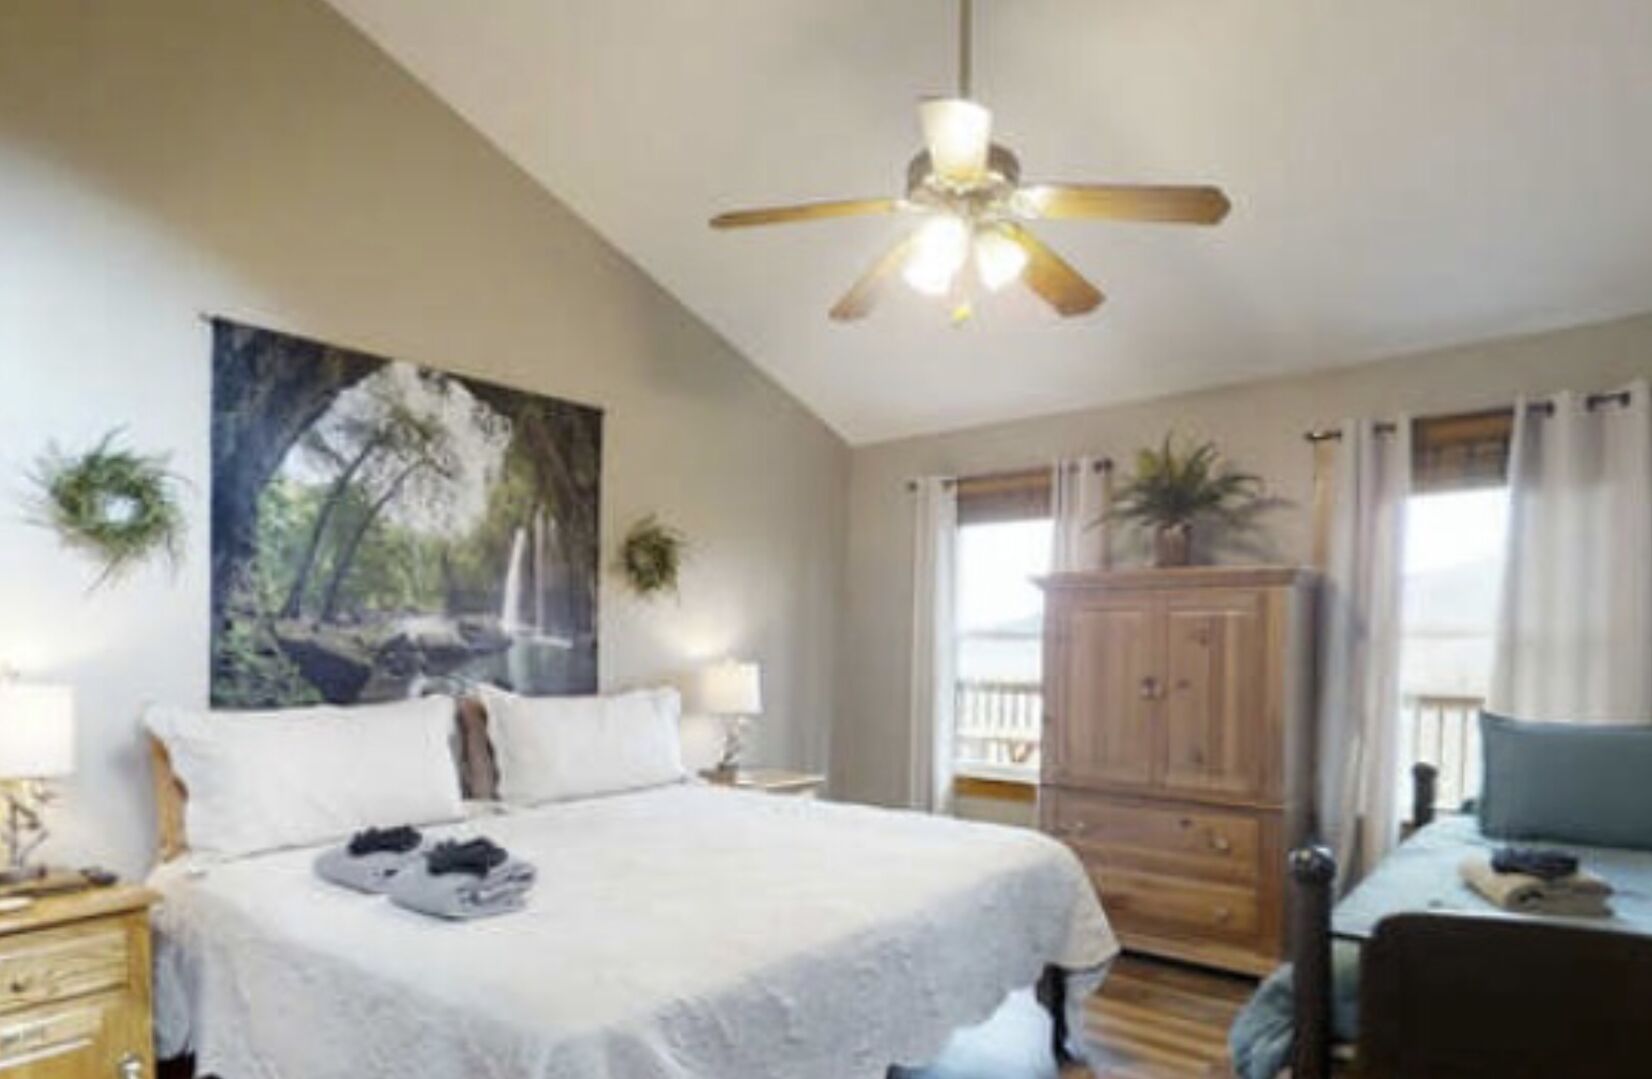 Enjoy a ceiling fan, an air cleaner and a flat screen TV in this bedroom.